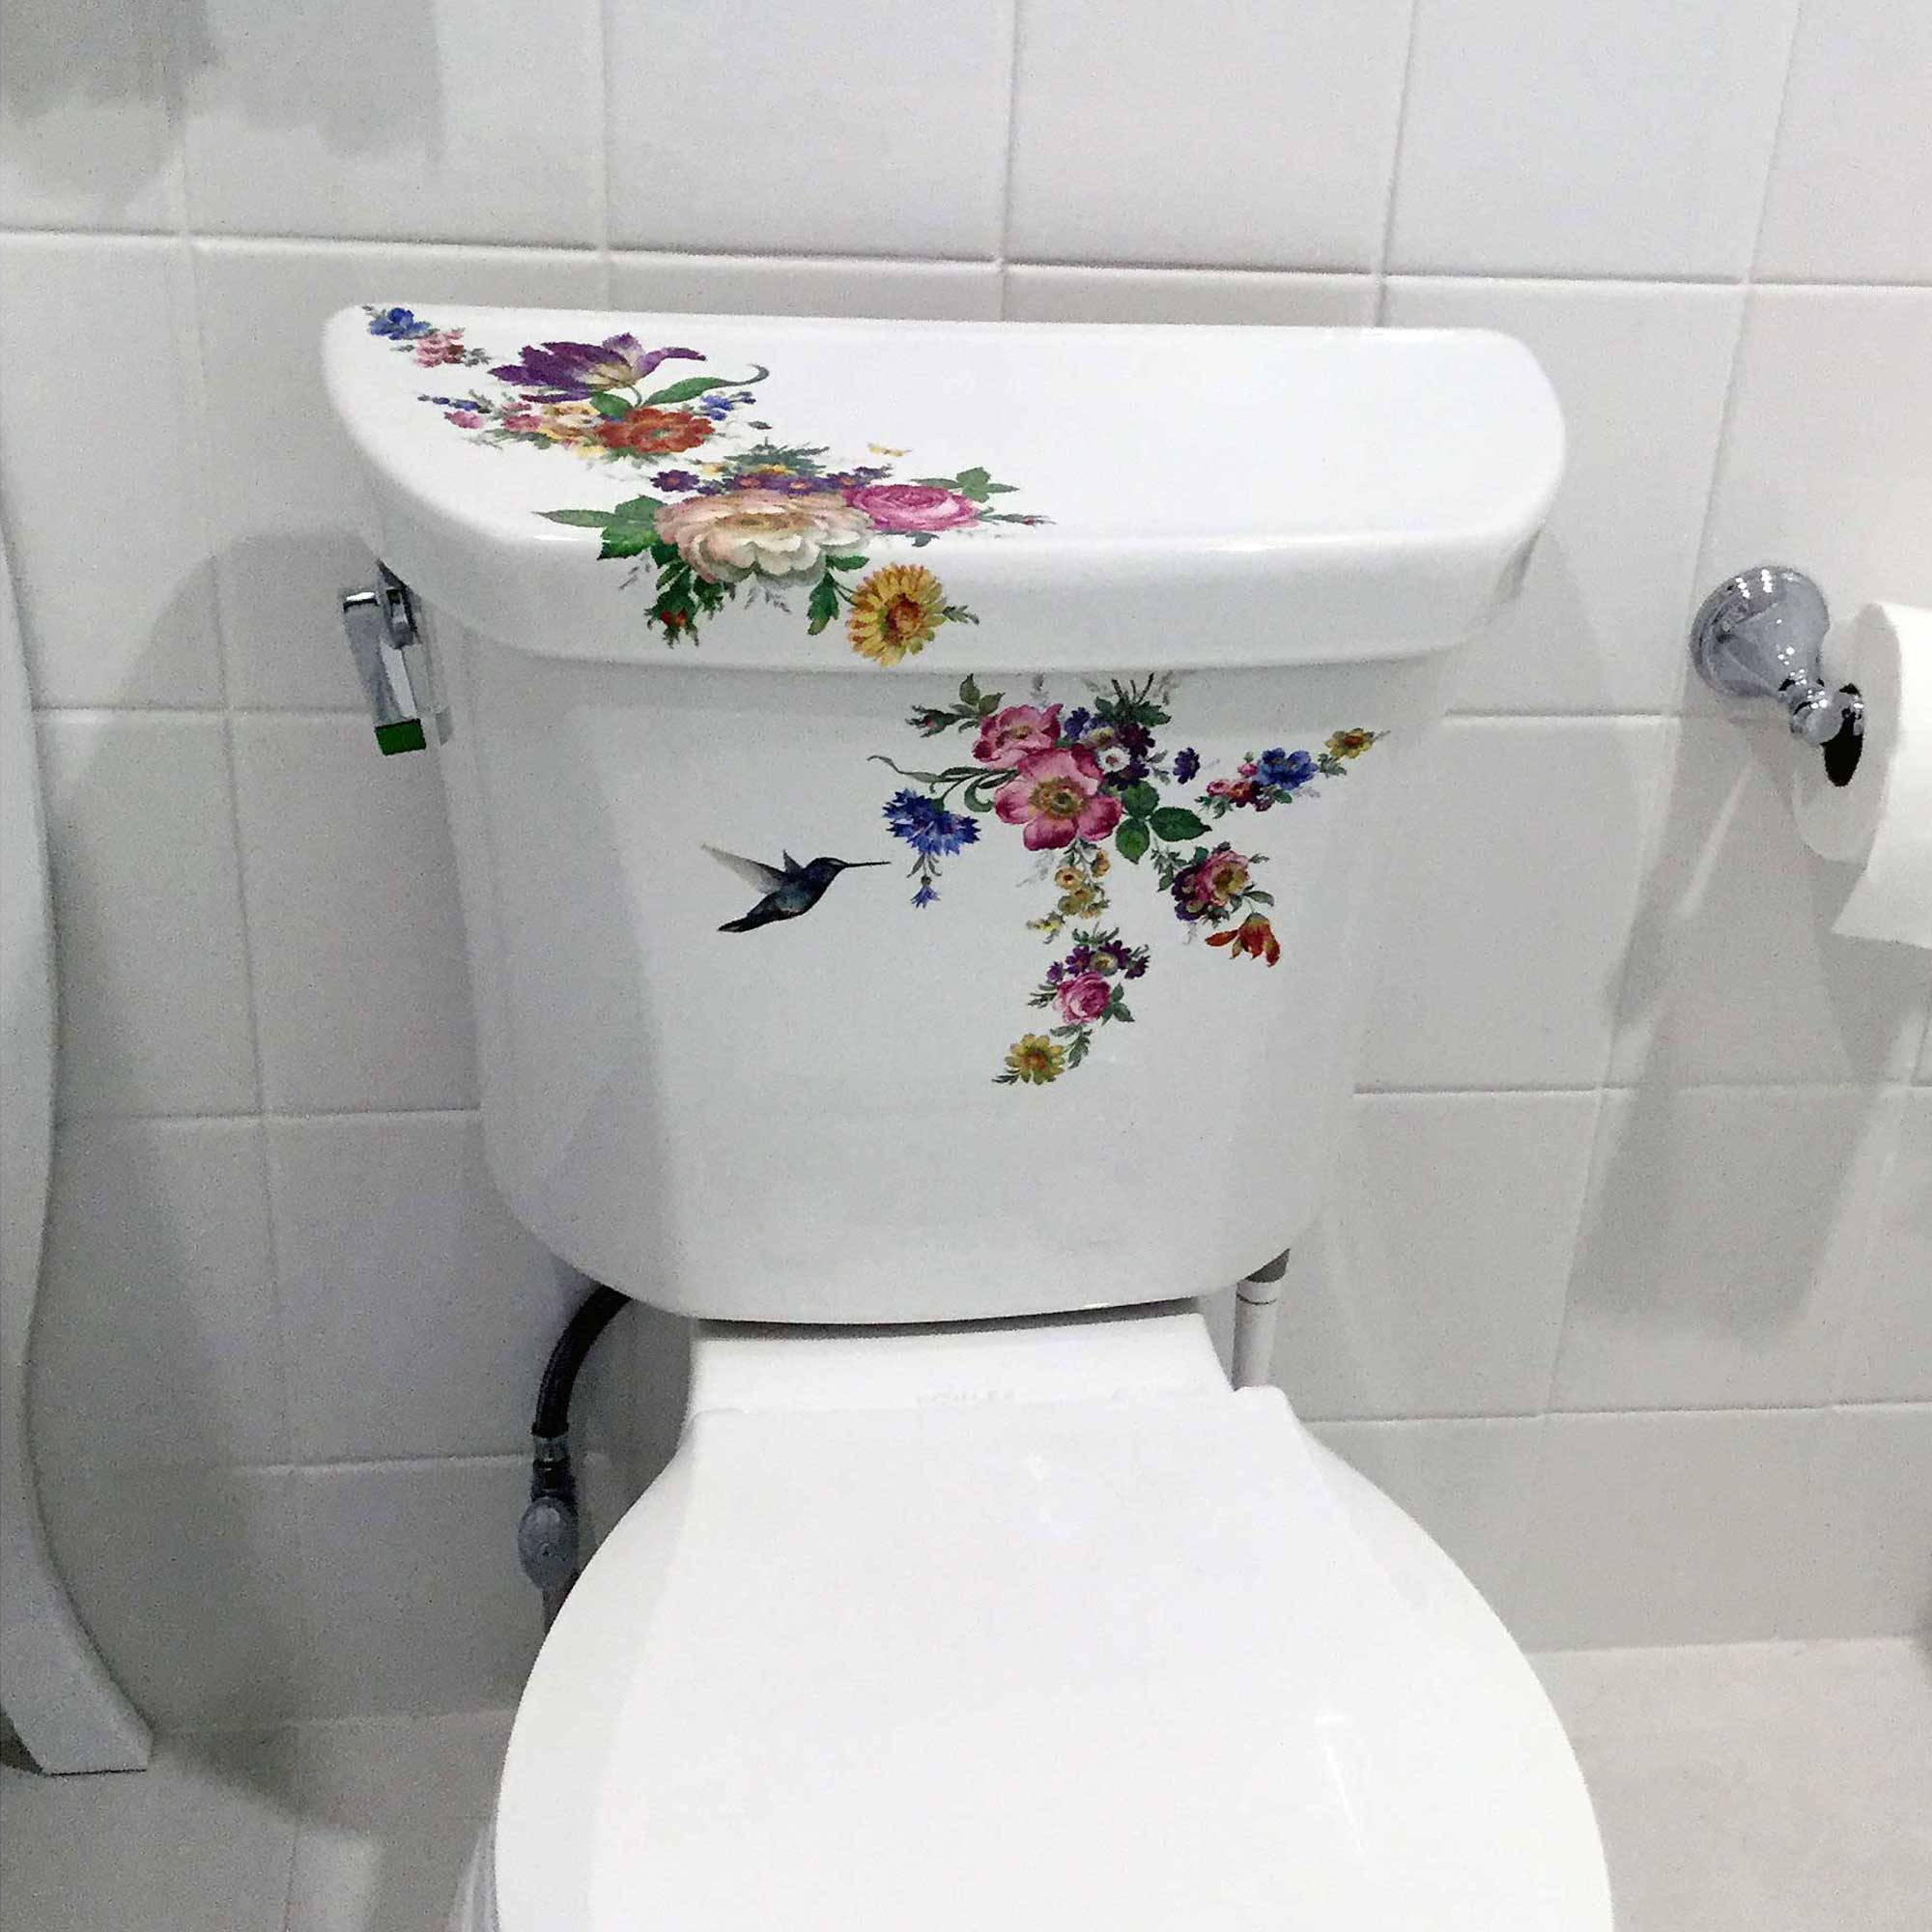 hand painted kohler toilet decorated with flowers and hummingbird and butterflies